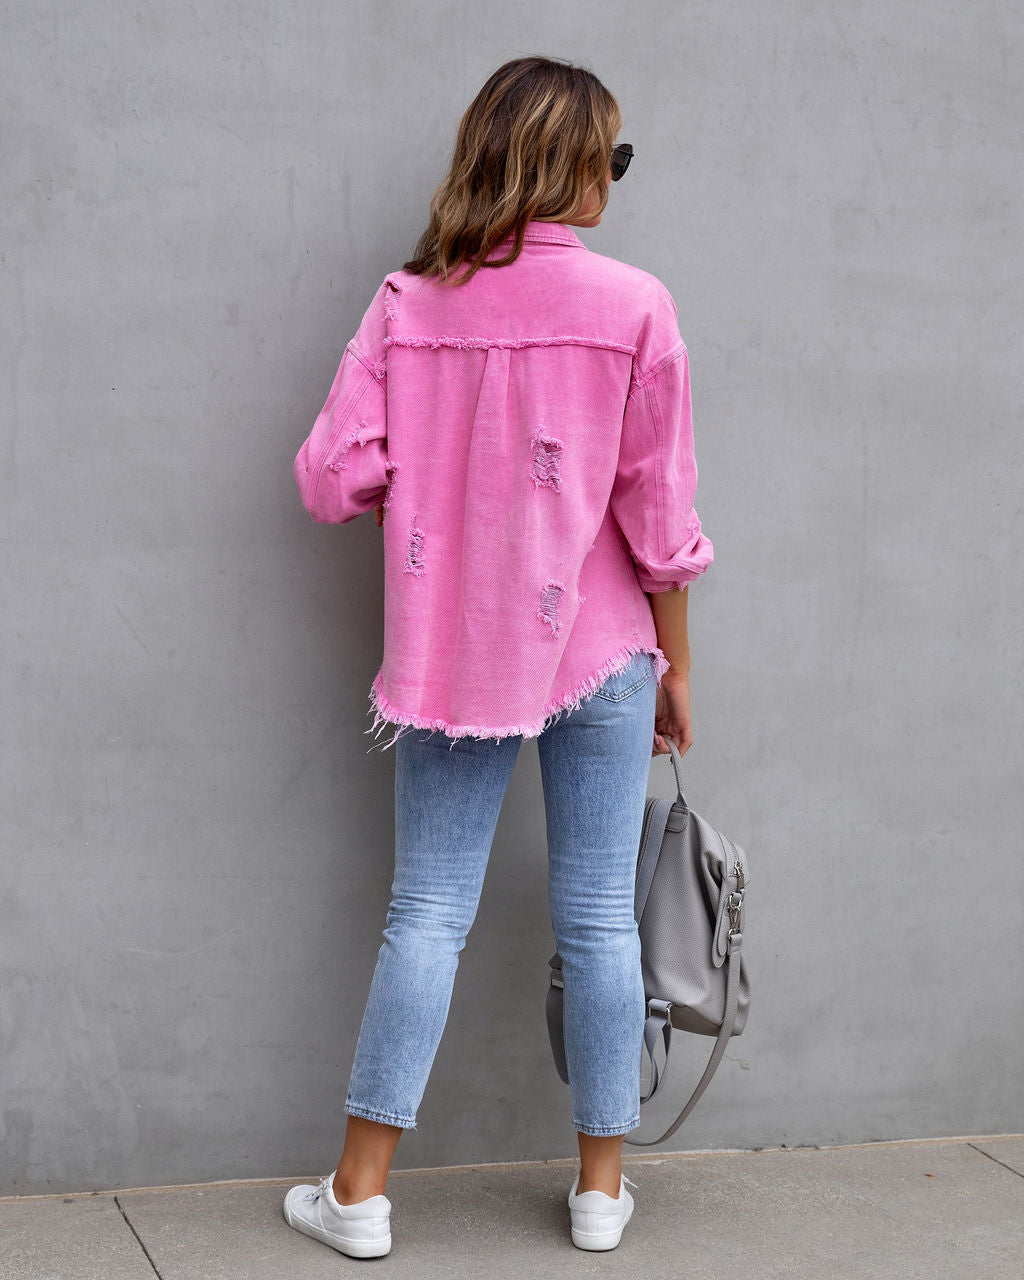 Fashion Ripped Shirt Jacket Female Autumn And Spring Casual Tops Womens Clothing - Homreo